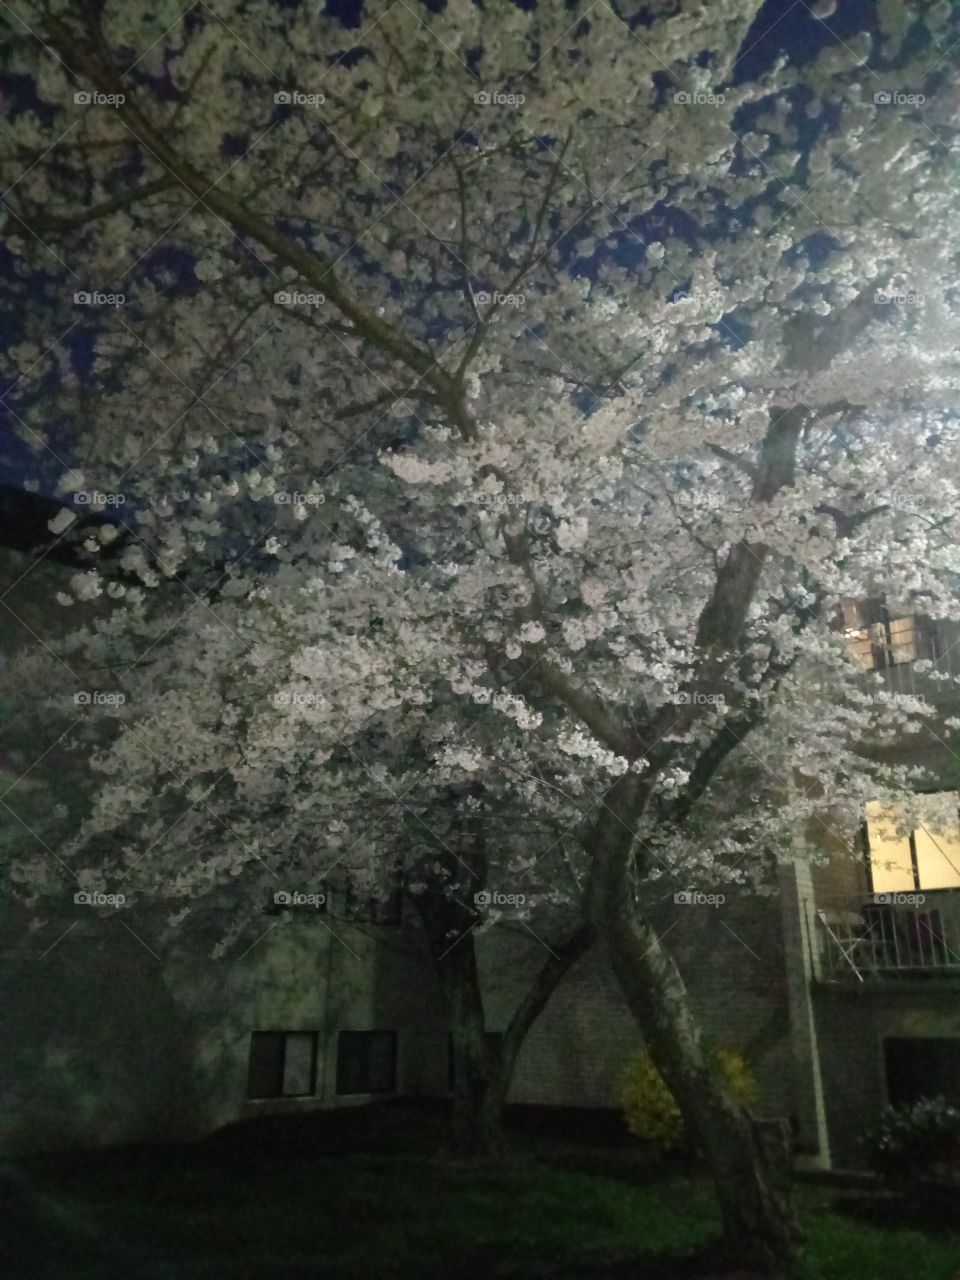 I call this spring night beauty